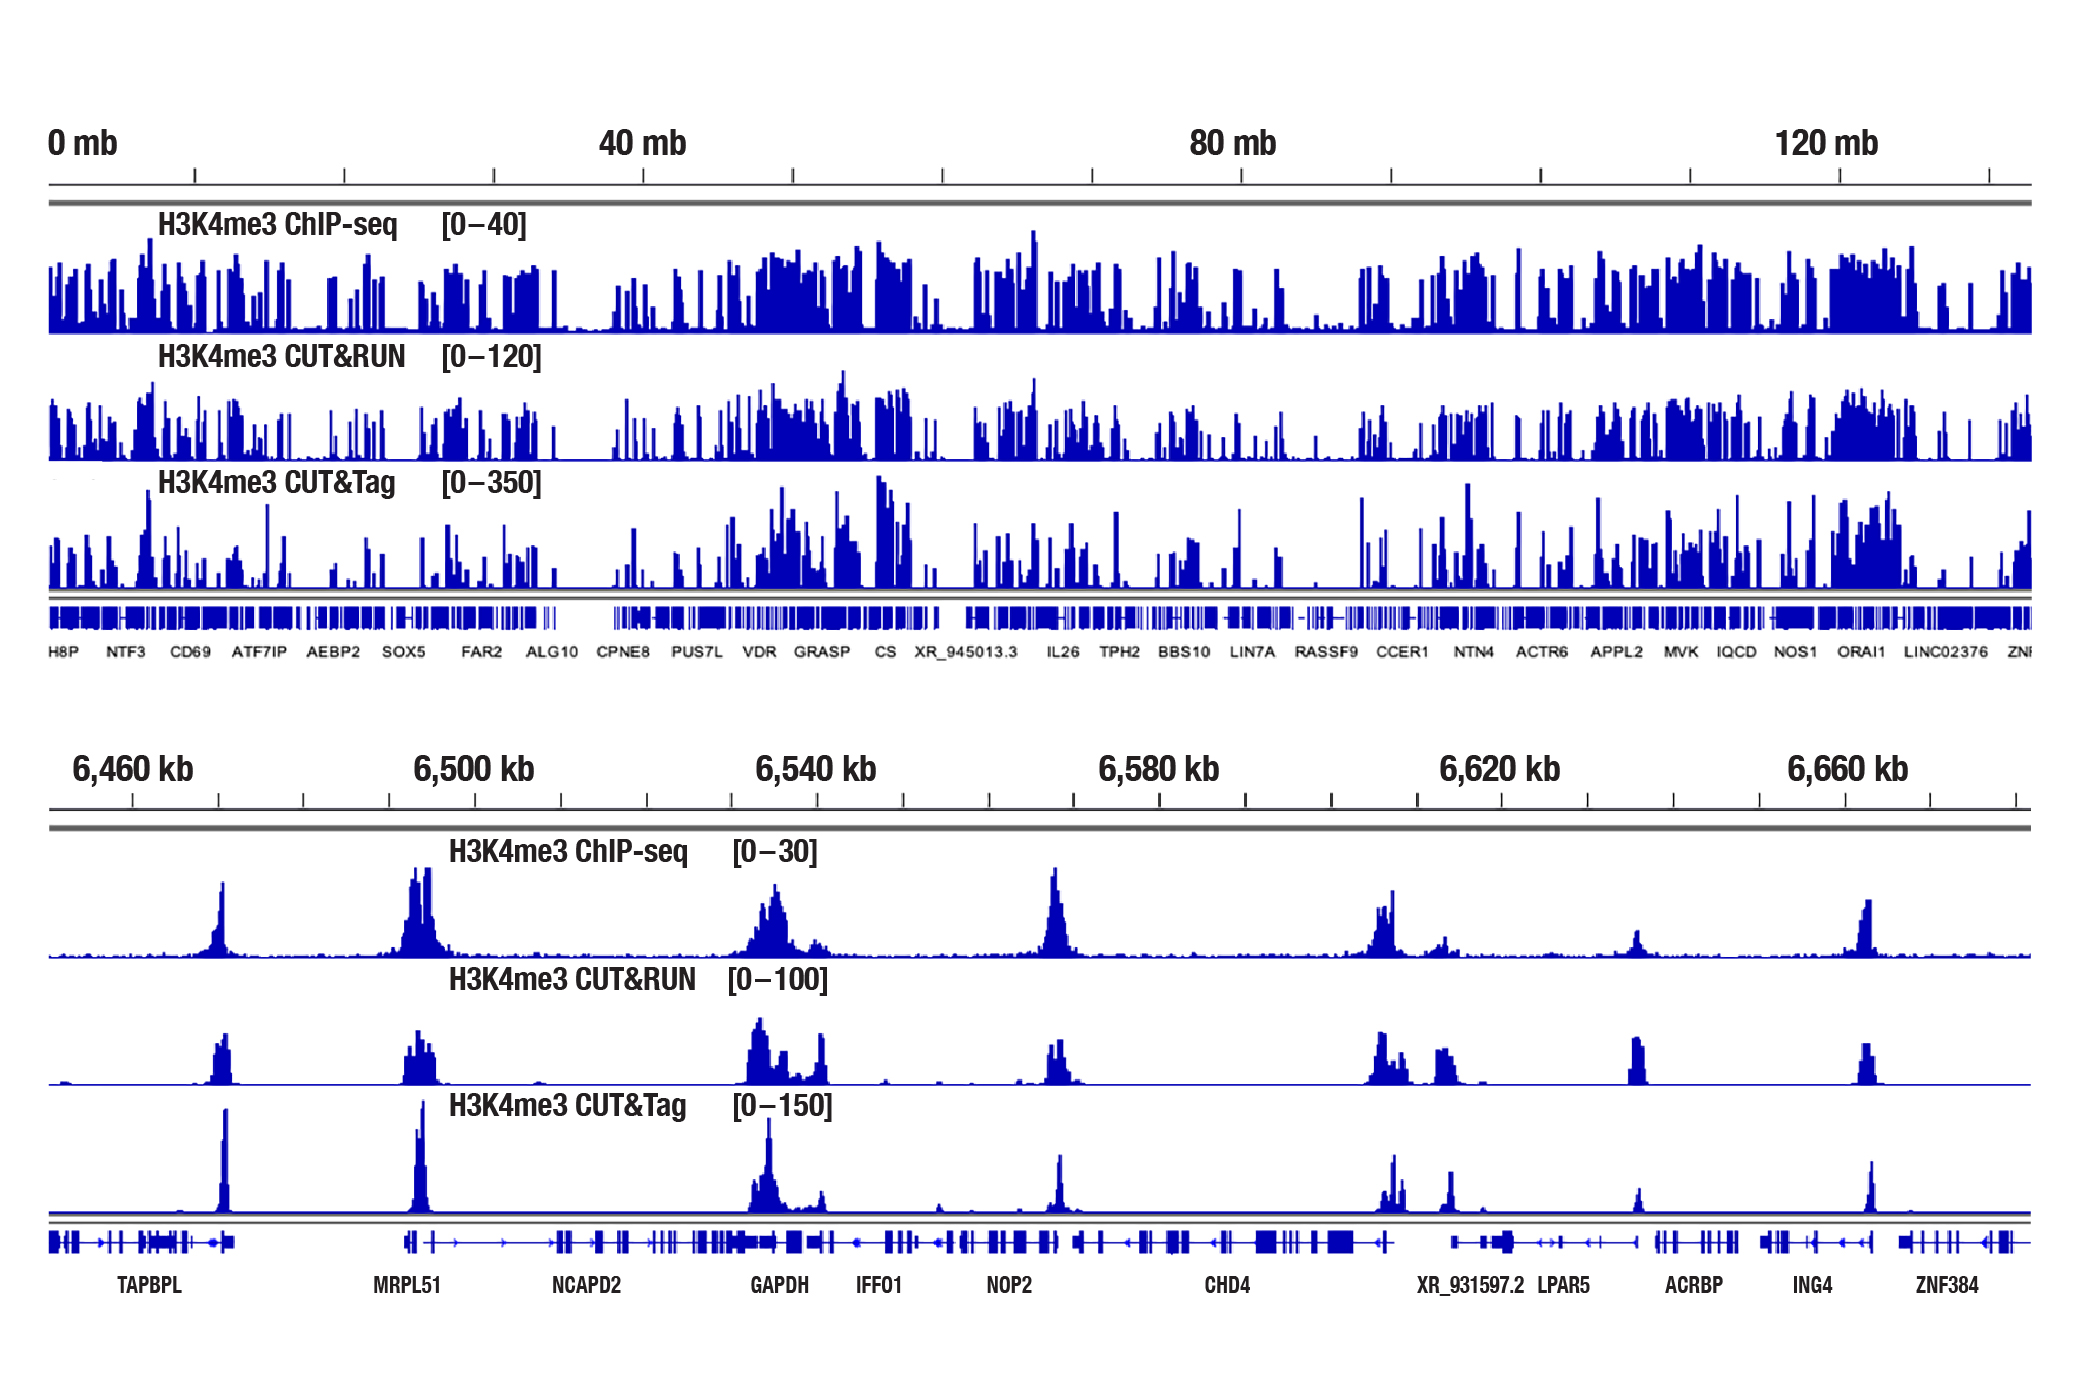 H3K4me3 sequencing results for ChIP-seq, CUT&RUN, and CUT&Tag